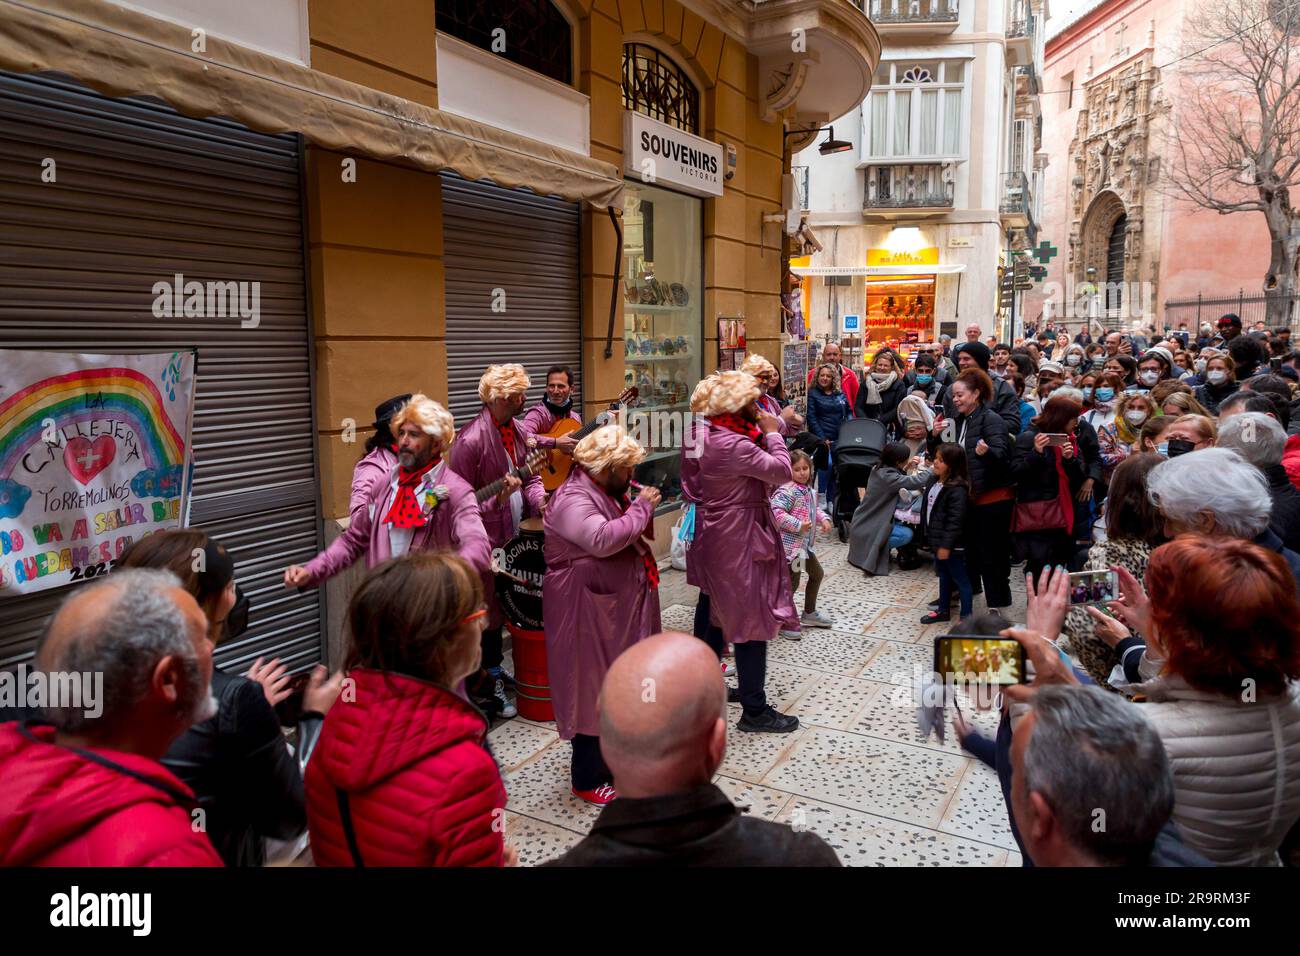 Malaga, Spain - FEB 27, 2022: People celebrating the Malaga Carnival with costumes, confettis, music, dance, marches and plays for kids in Malaga Stock Photo